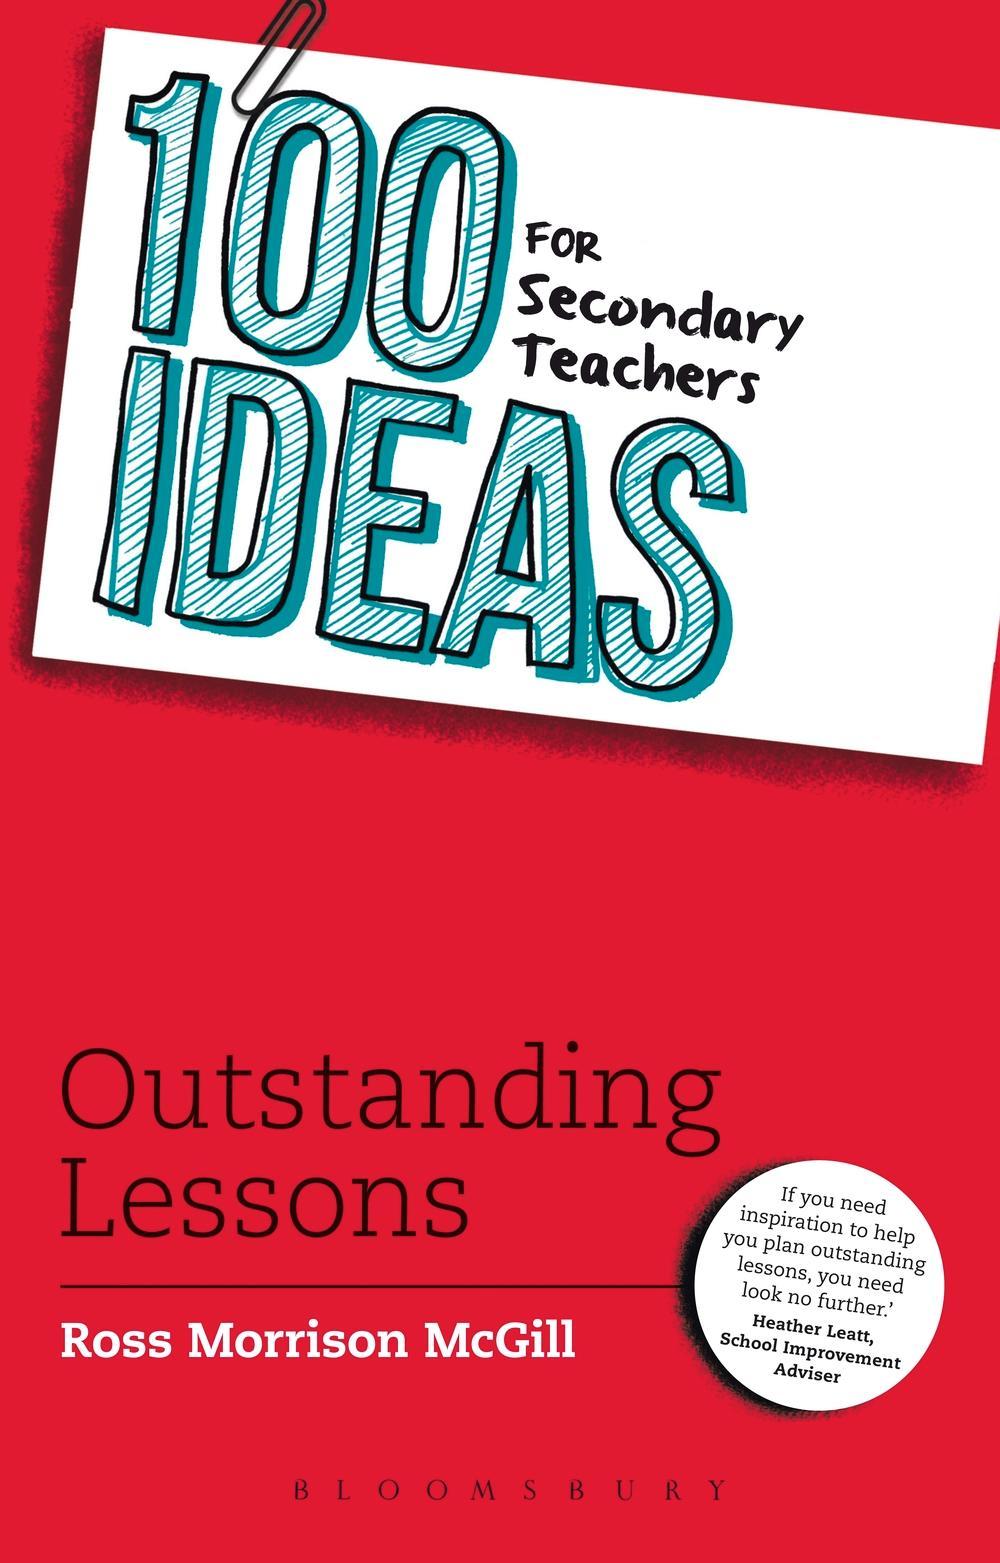 100 Ideas for Secondary Teachers: Outstanding Lessons